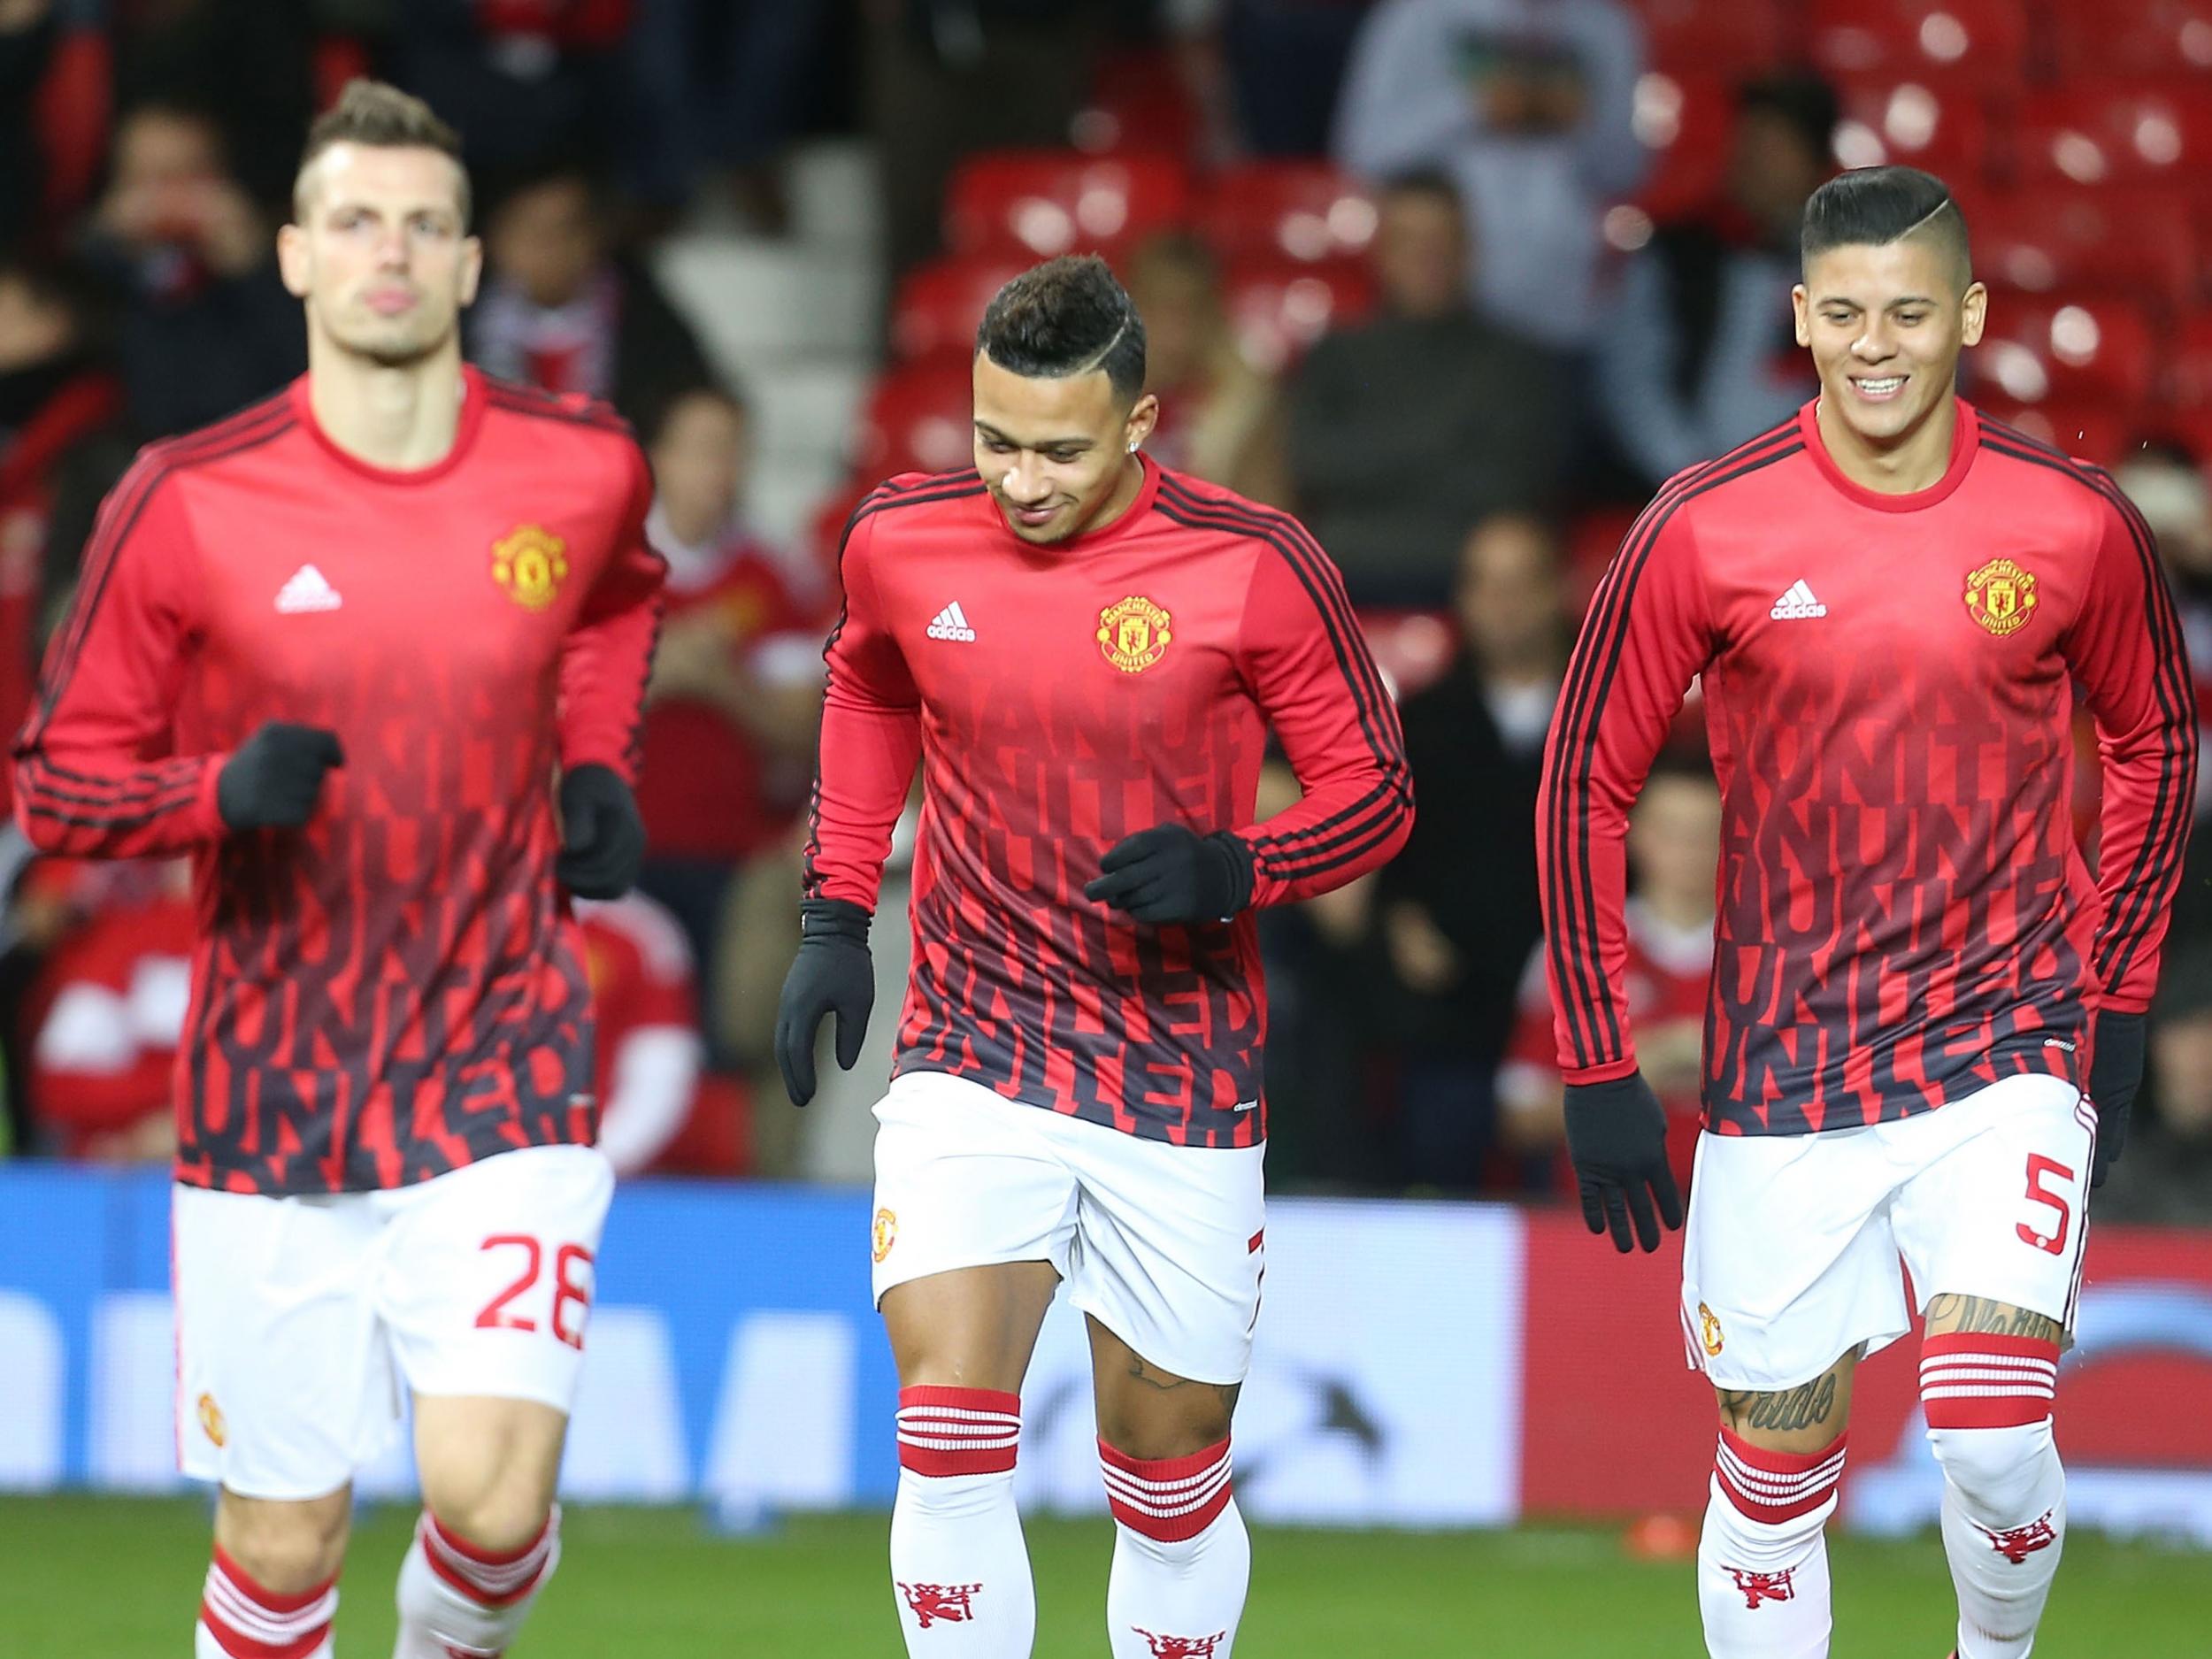 Schneiderlin, Depay and Rojo are among those who could leave